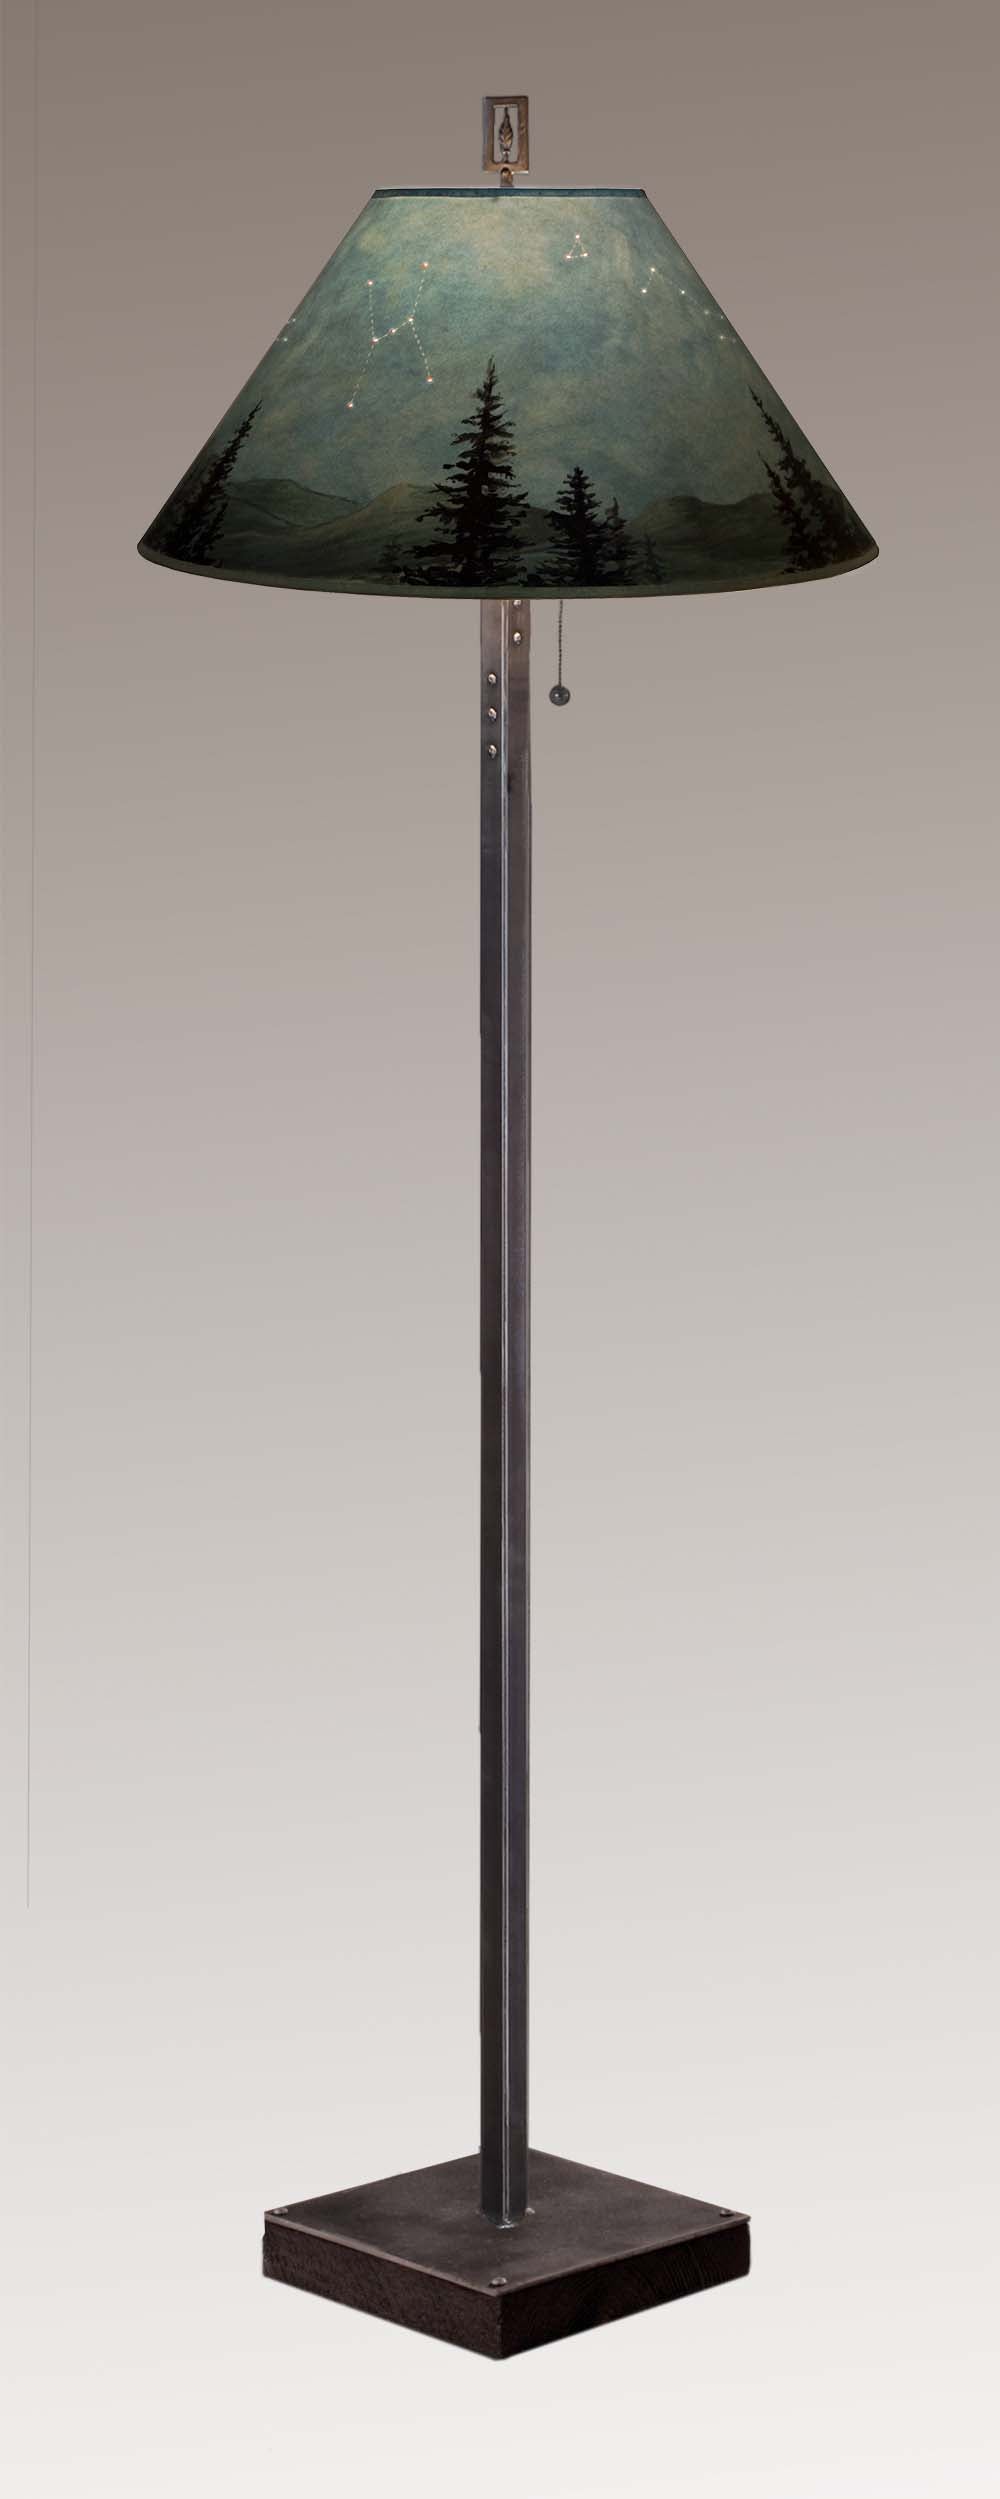 Janna Ugone &amp; Co Floor Lamps Steel Floor Lamp on  Reclaimed Wood with Large Conical Shade in Midnight Sky